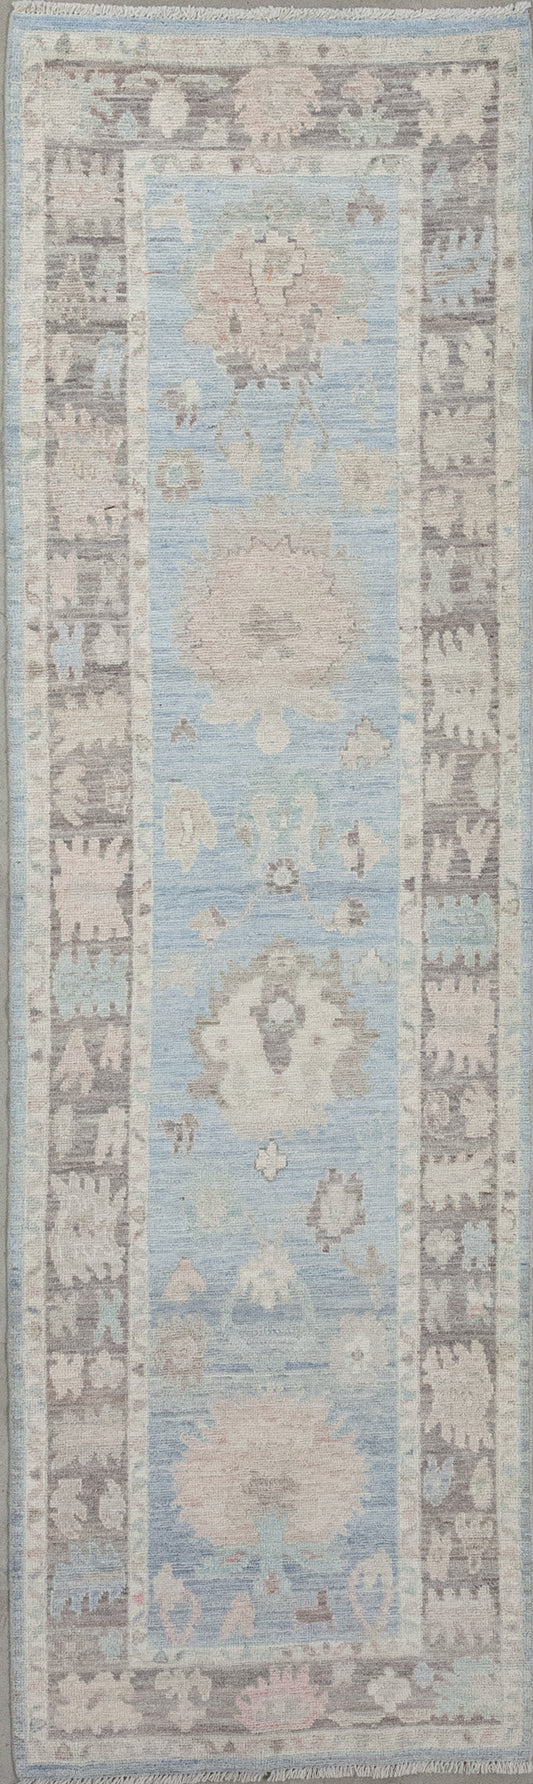 Hallway rug was woven with a cloudy tone for the background and an elegant brown frame. 